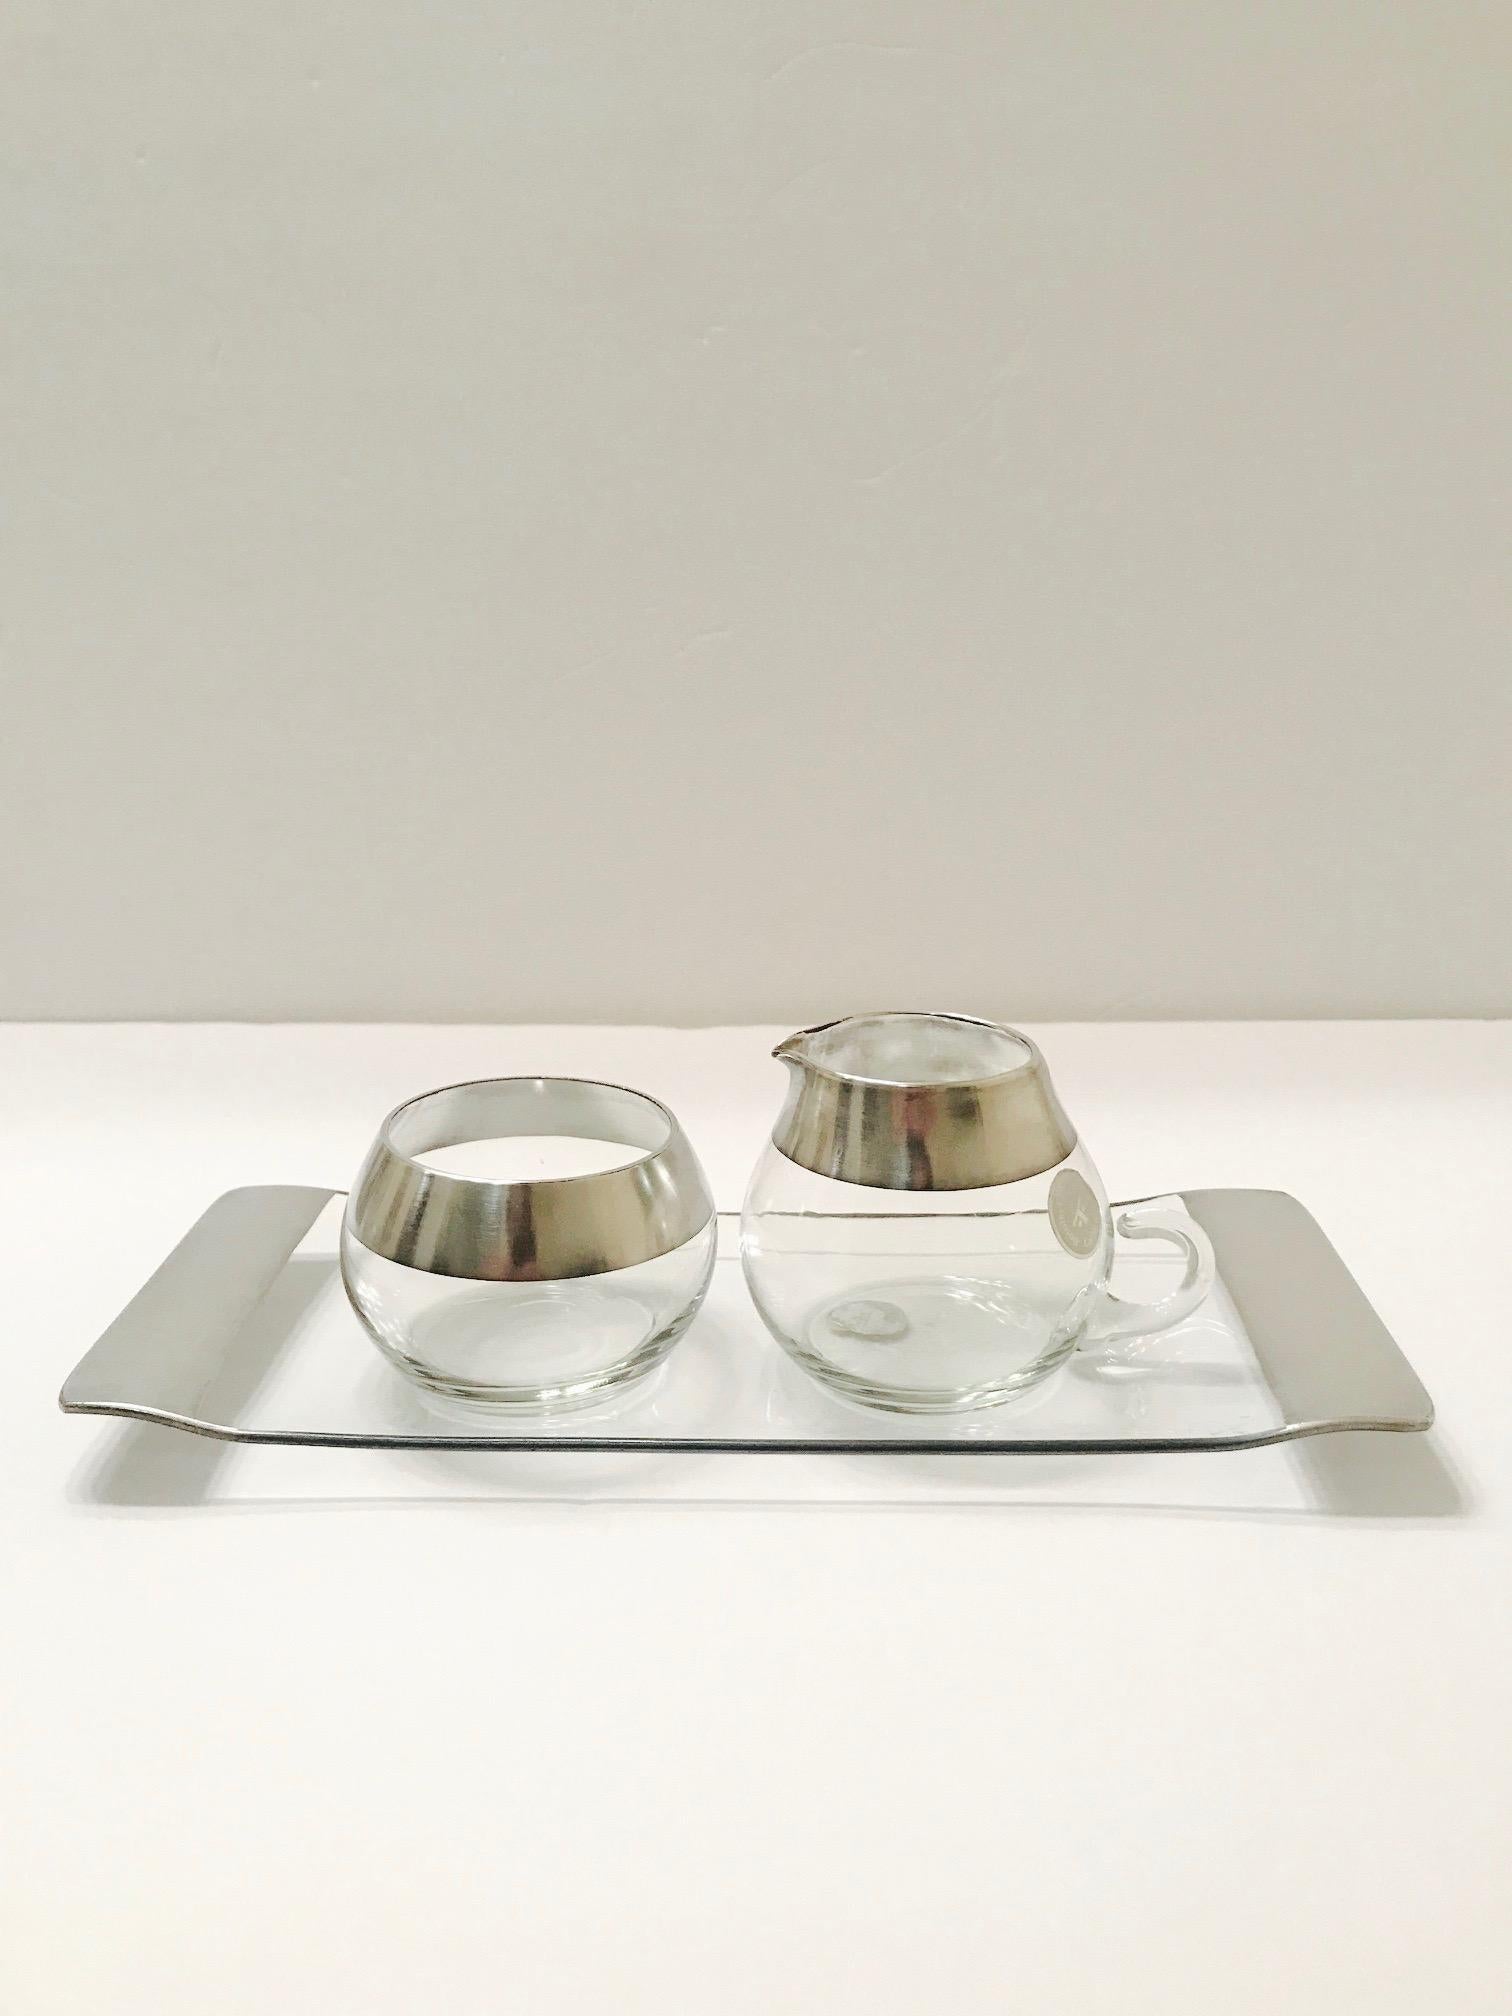 Rare Mid-Century Modern blown glass sugar and creamer set with the iconic sterling silver overlay design that Dorothy Thorpe is known for. Set includes creamer with spout and elegant blown glass handle, a streamline sugar bowl, and a gorgeous narrow